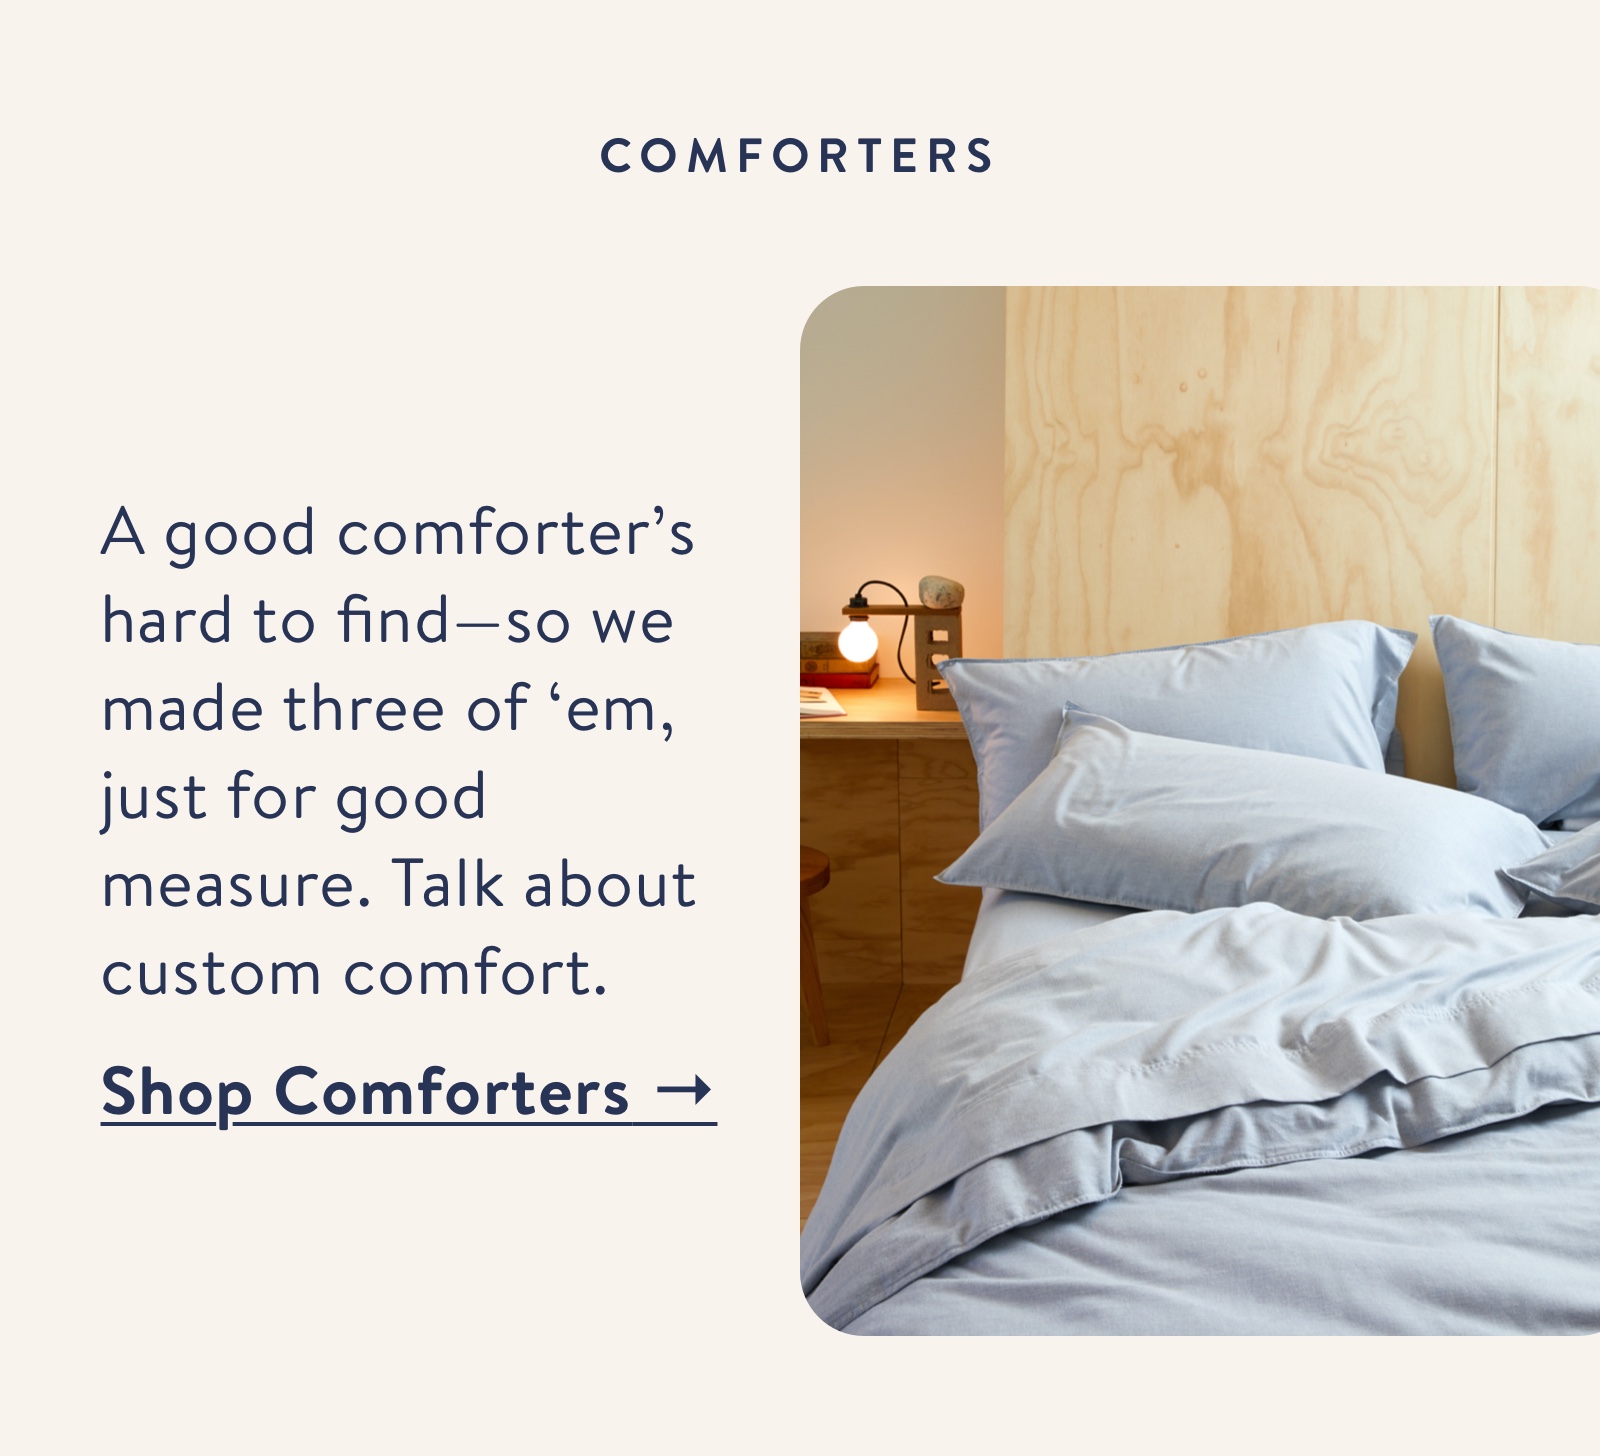 A good comforter's hard to find-so we made three of 'em, just for good measure. 